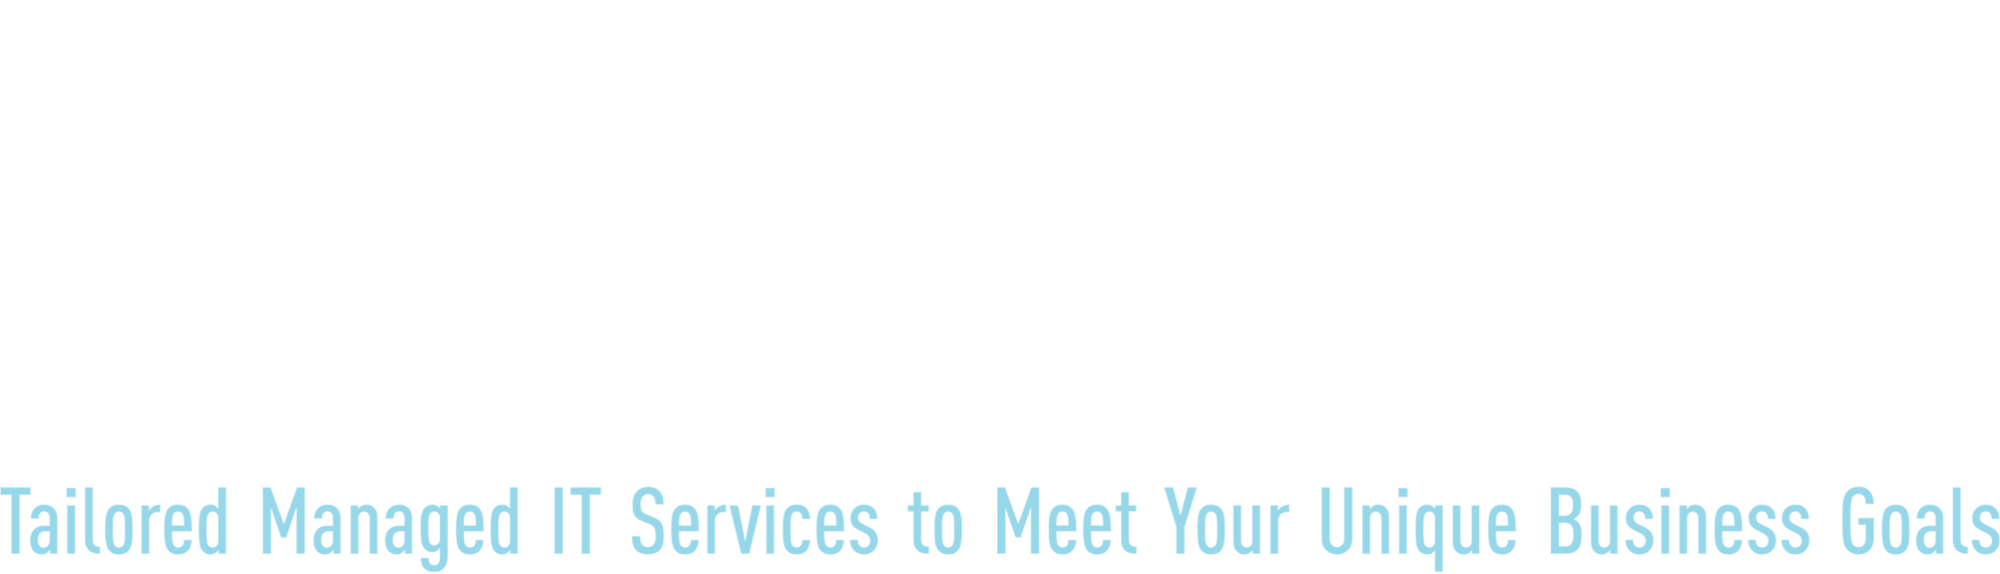 More expertise, More solutions; Tailored Managed IT Services to Meet Your Unique Business Goals typography